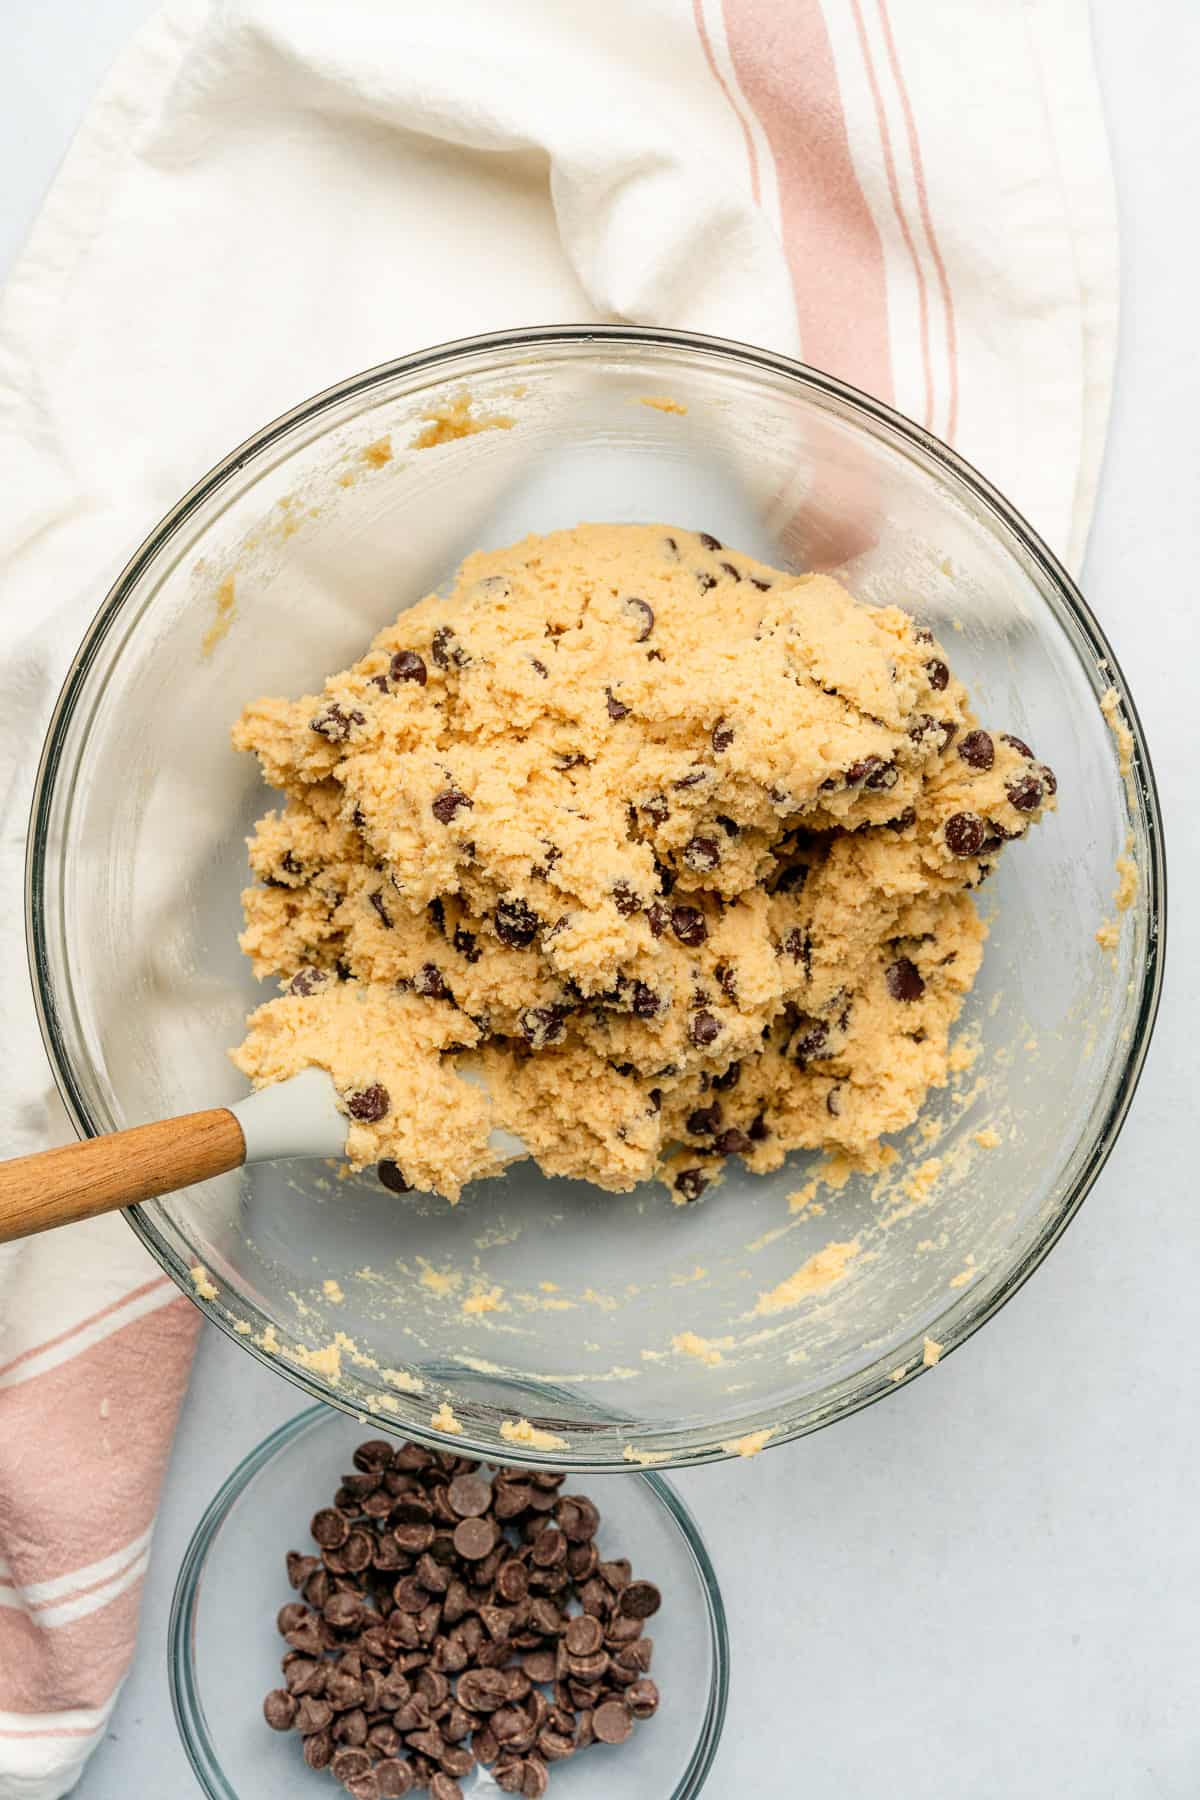 mixed together cookie dough with chocolate chips in a bowl